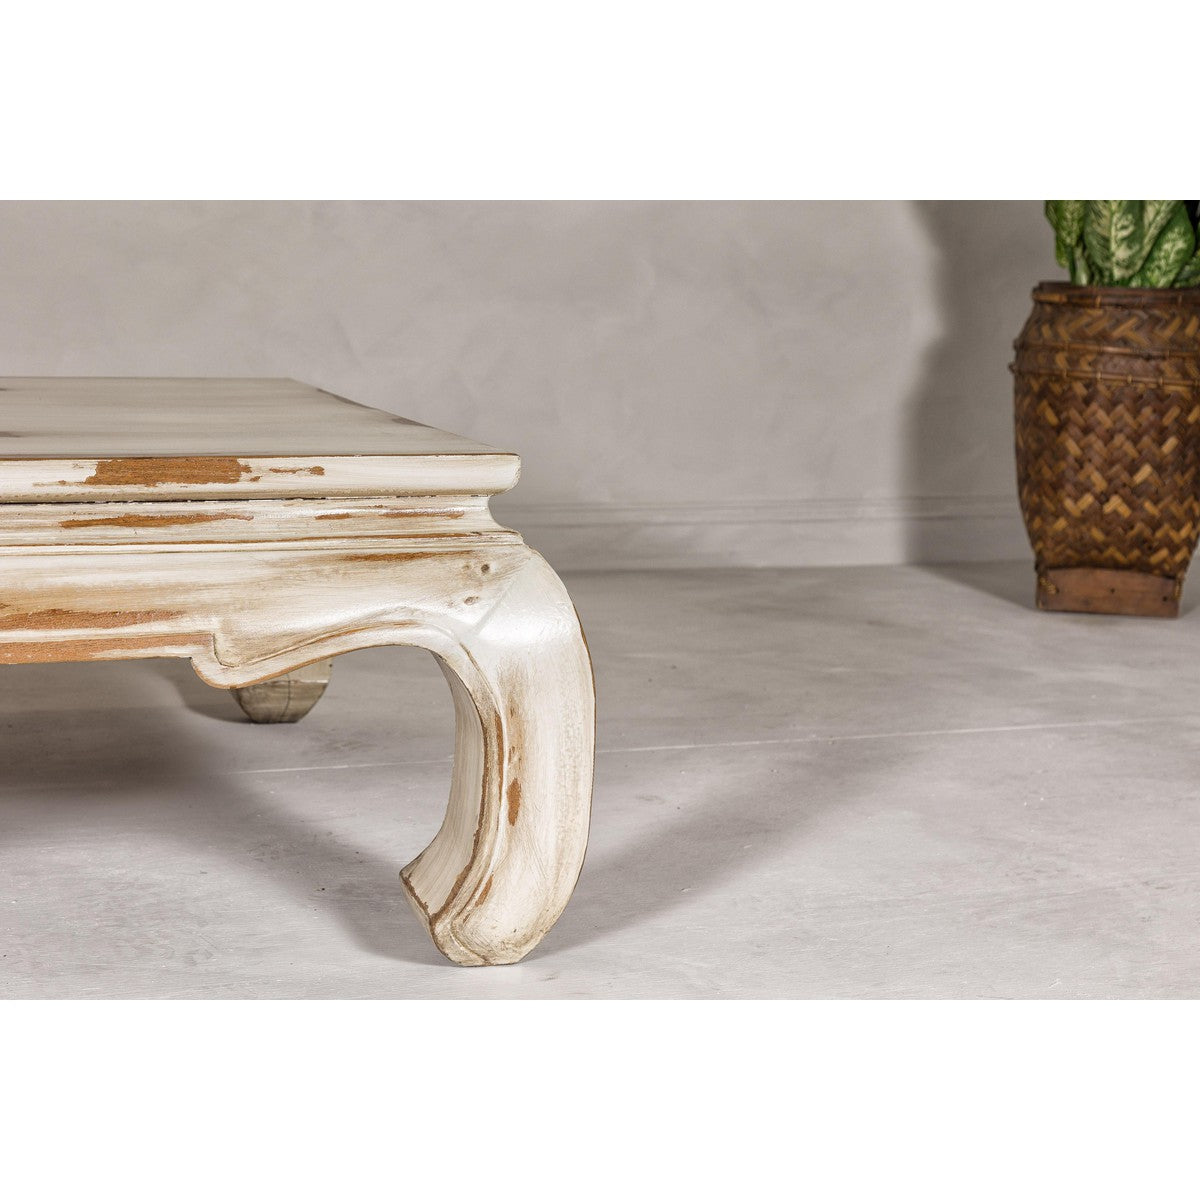 Distressed White Coffee Table with Chow Legs and Square Top, Vintage-YN7957-5. Asian & Chinese Furniture, Art, Antiques, Vintage Home Décor for sale at FEA Home